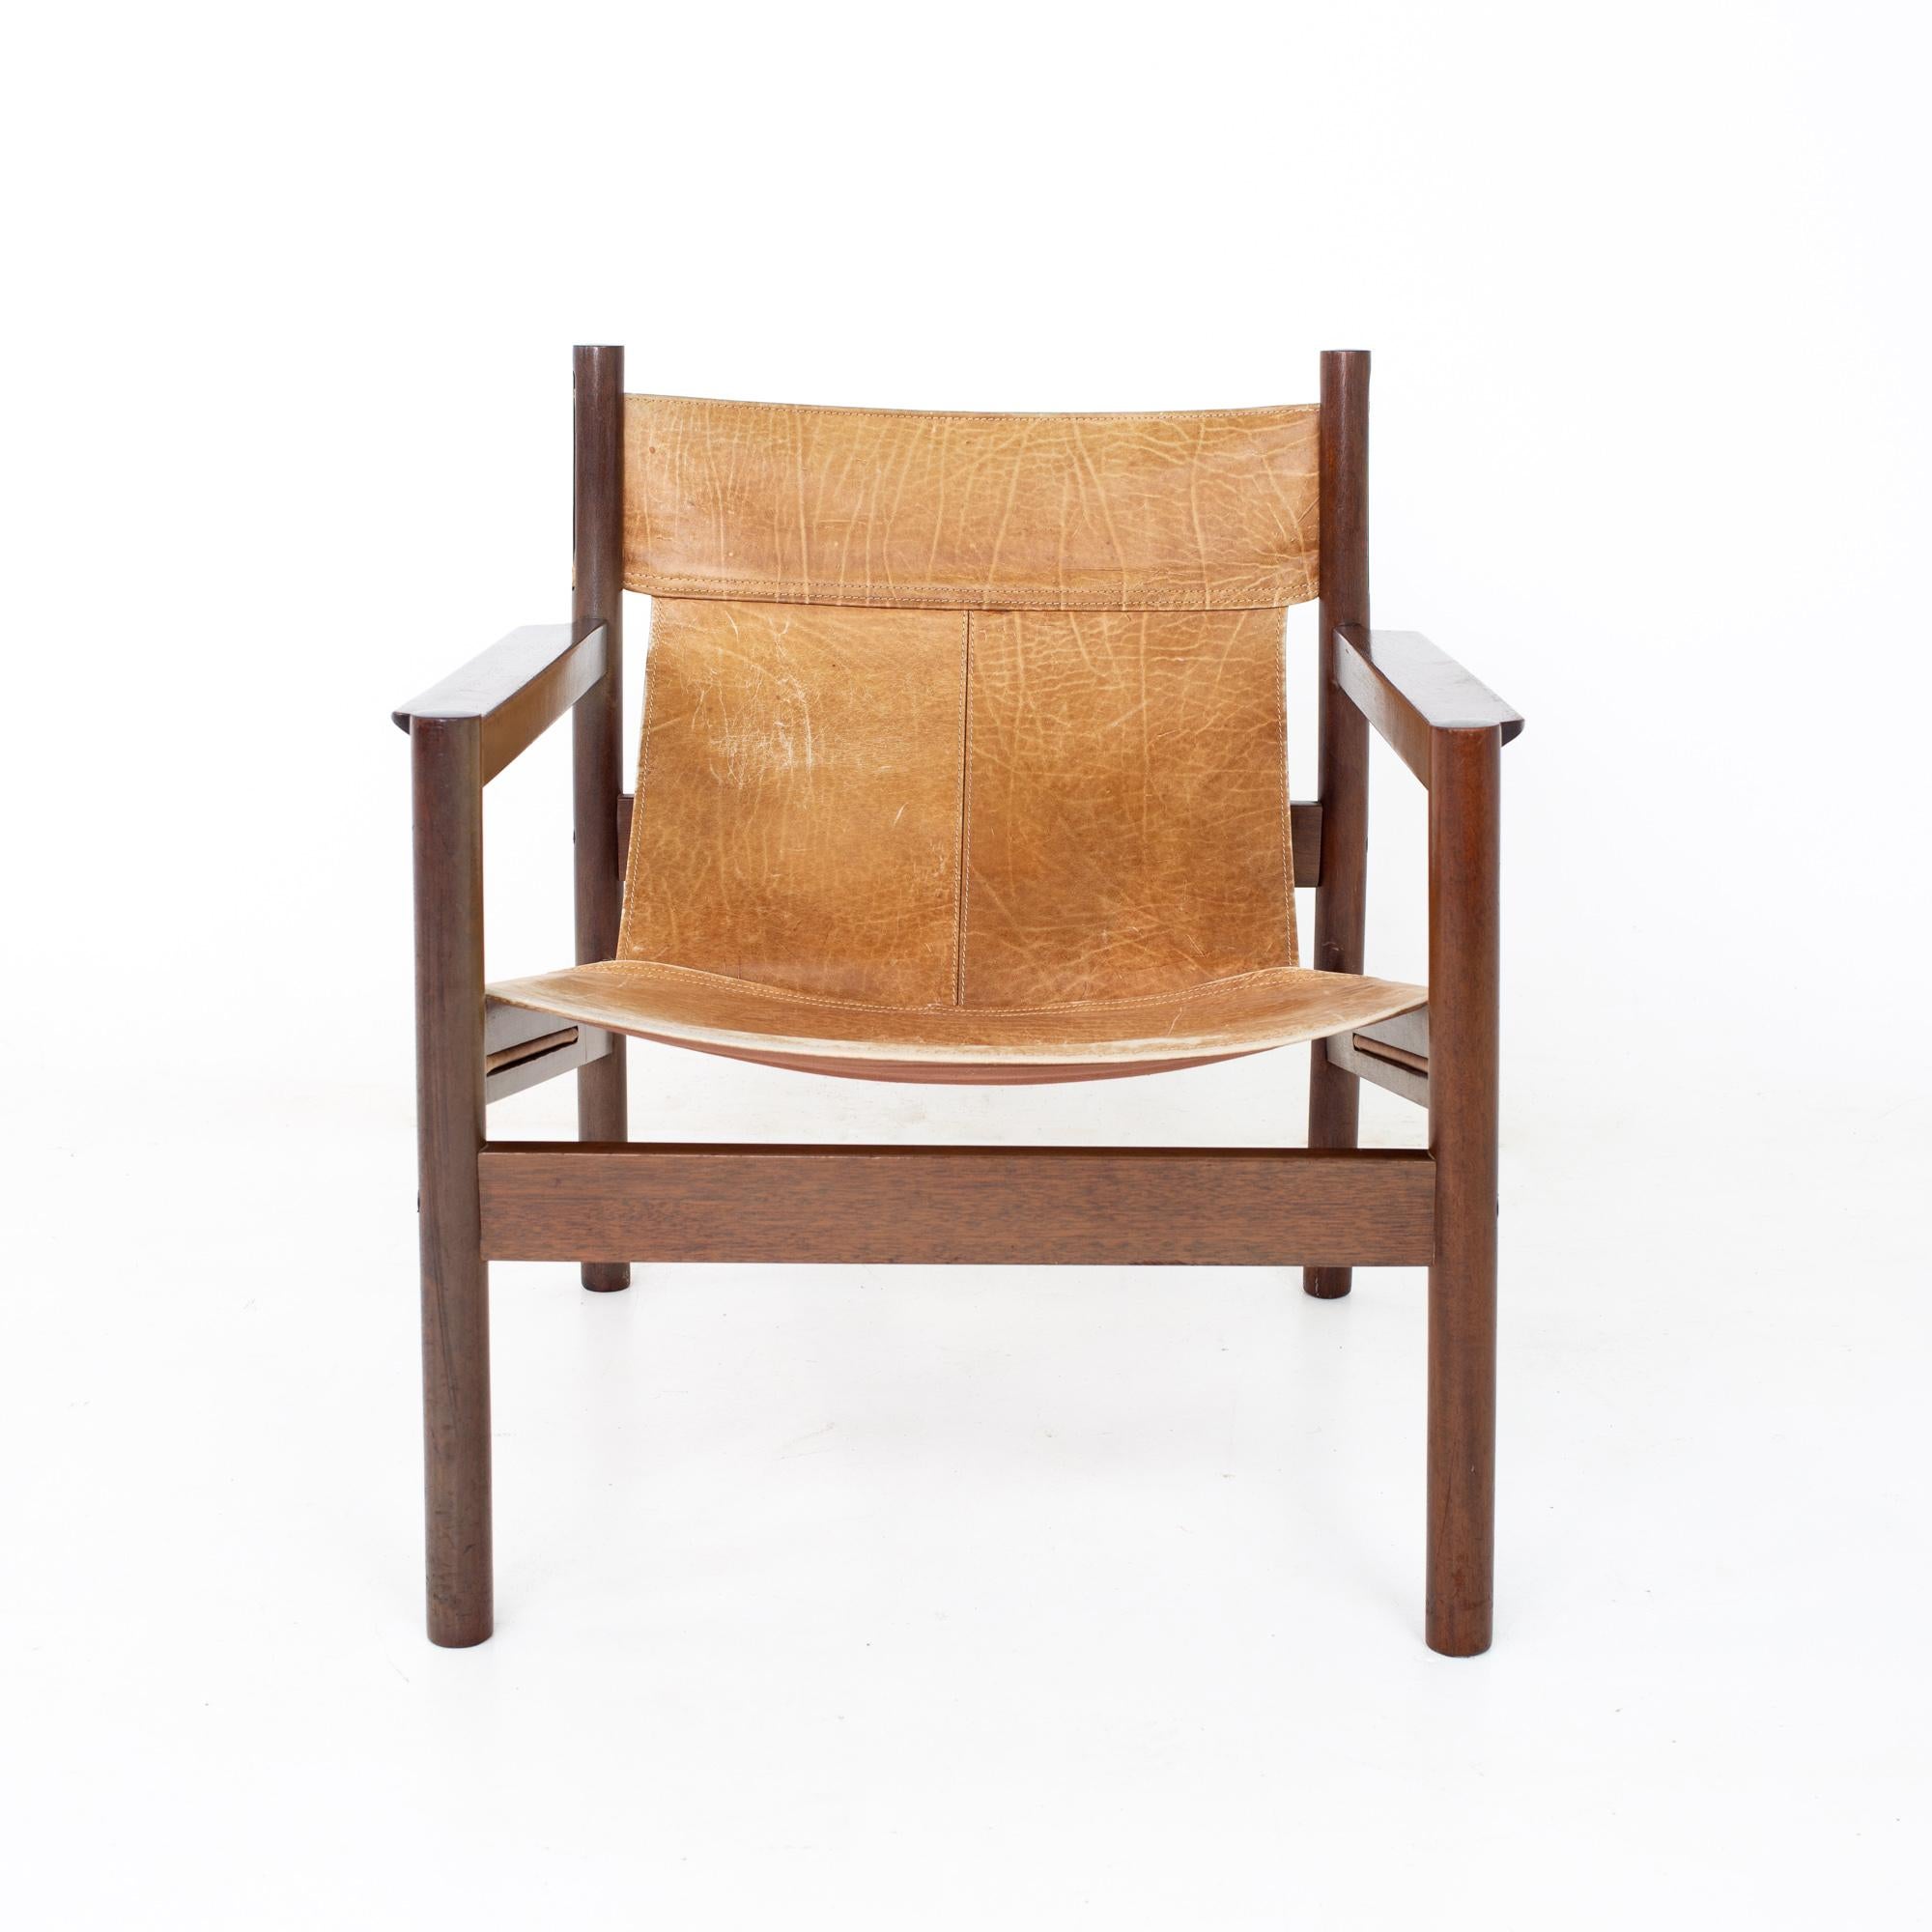 Erik Worts Arne Norell Safari style mid century leather sling lounge chair

Chair measures: 25.75 wide x 26.5 deep x 29 high, with a seat height of 15 inches and arm height of 21.5 inches

All pieces of furniture can be had in what we call restored